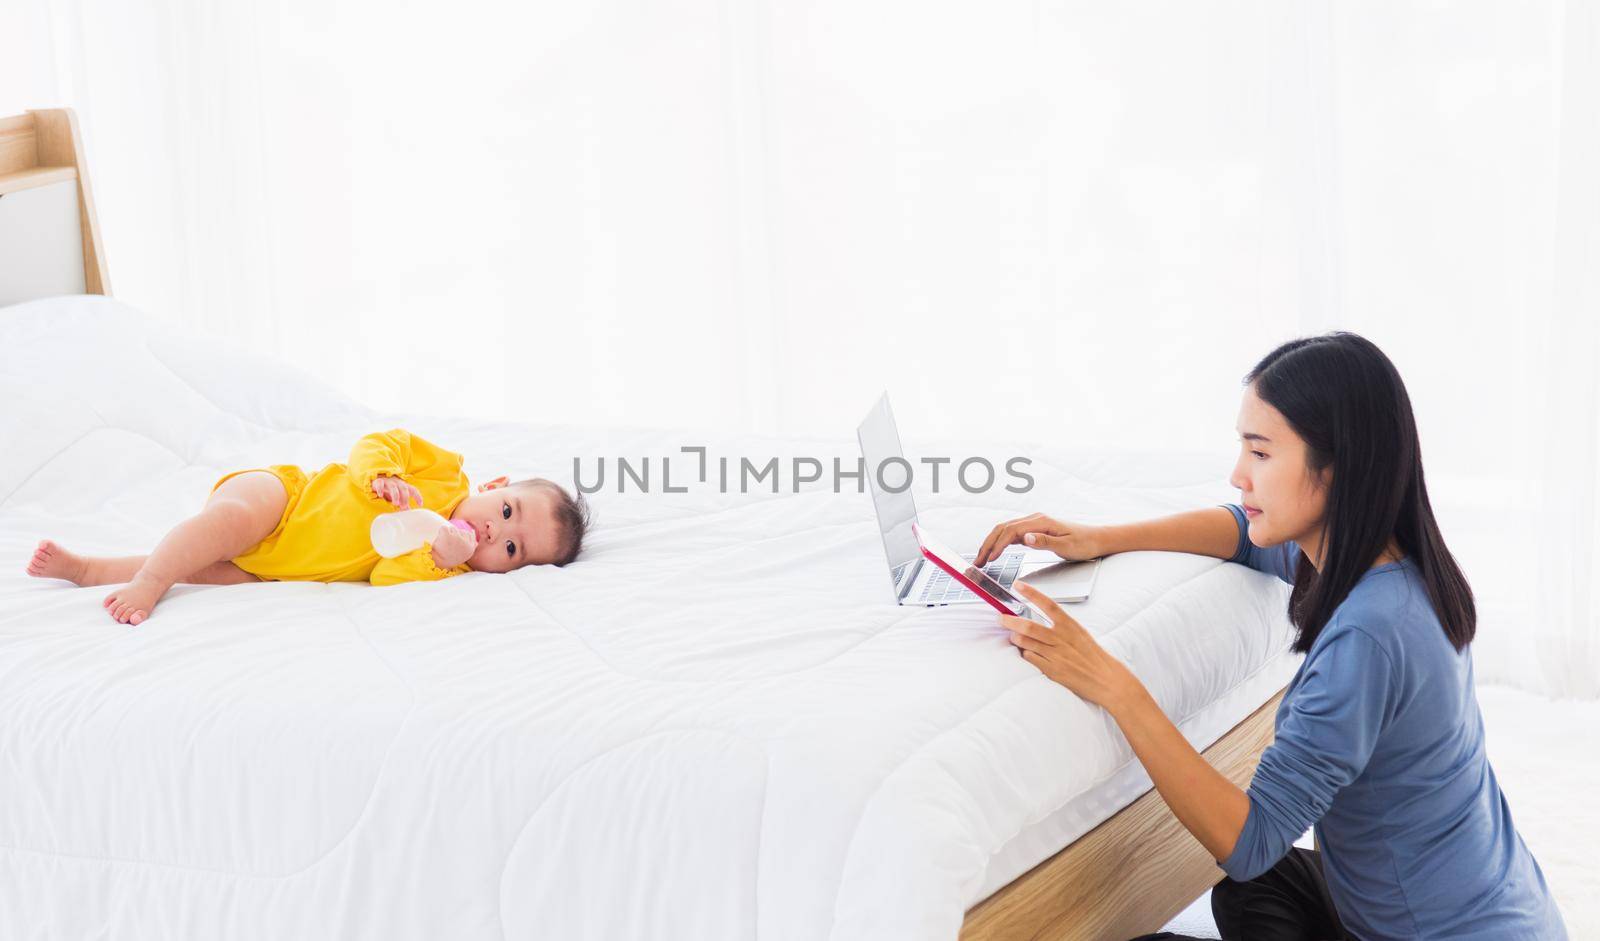 Asian young woman is working busy on laptop computer and tablet at home office in bedroom while her little baby is sleeping feeding lying on the white bed lying near mom